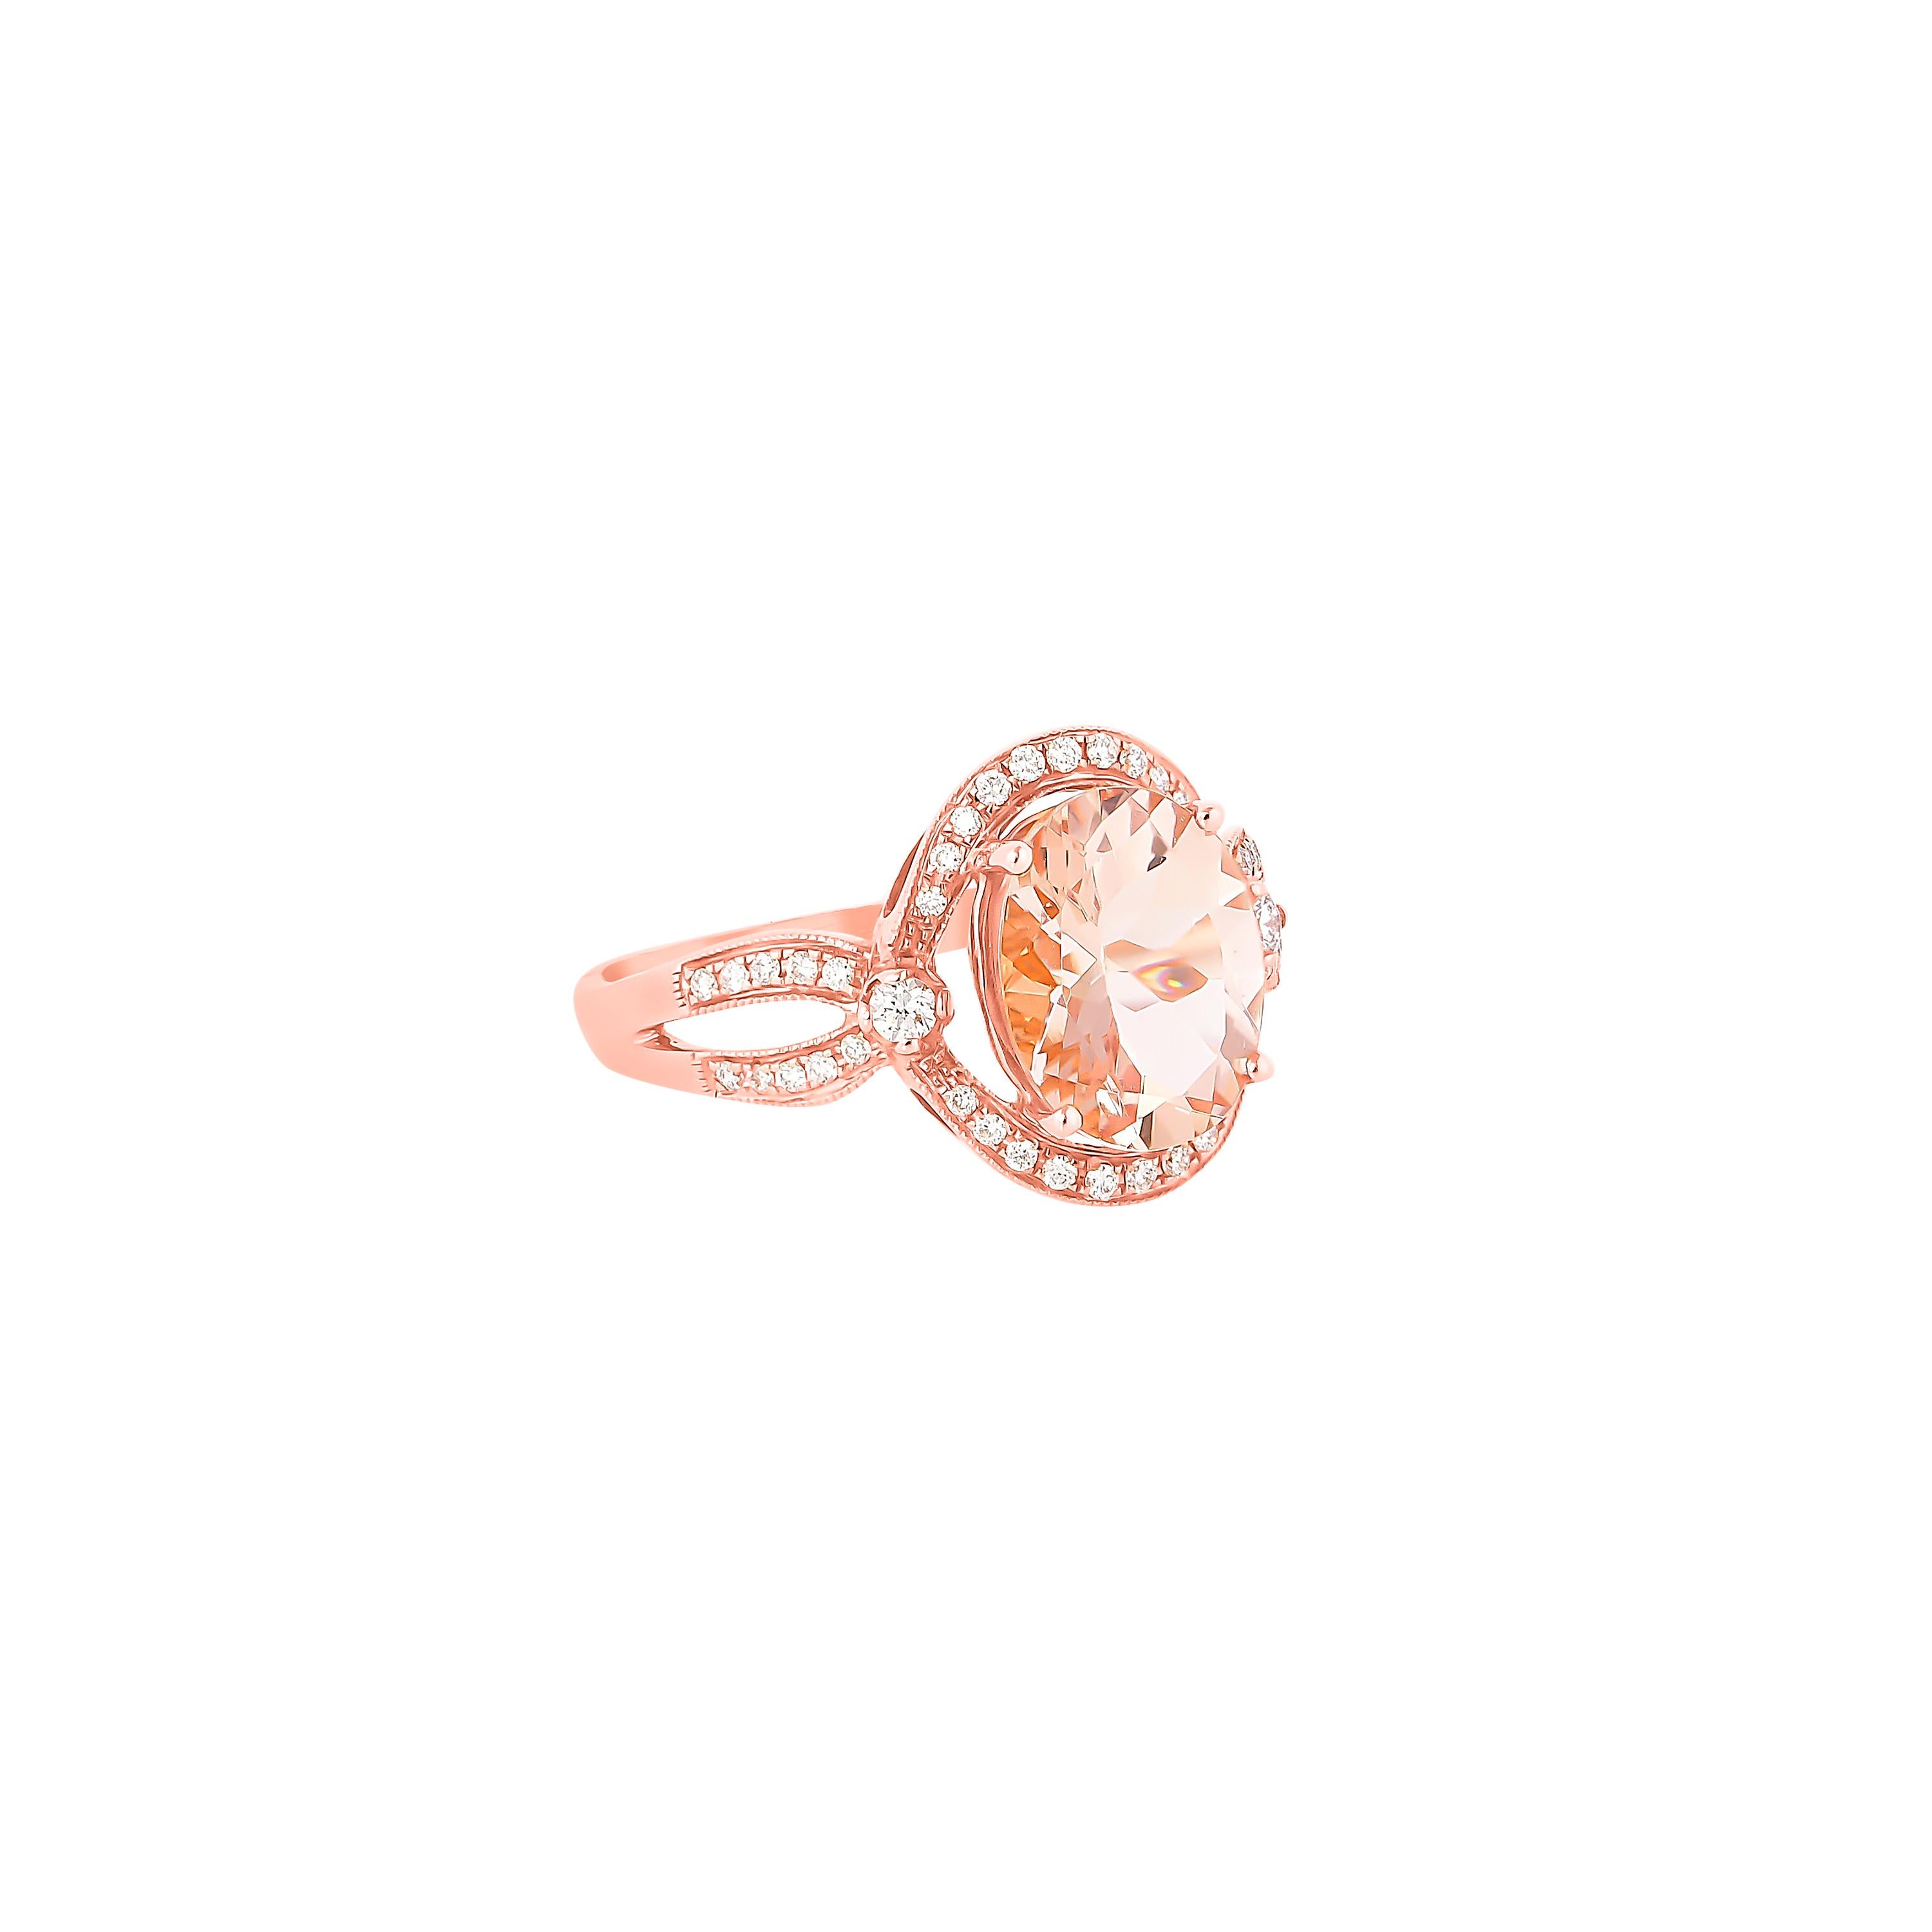 Contemporary 2.09 Carat Morganite and Diamond Ring in 18 Karat Rose Gold For Sale